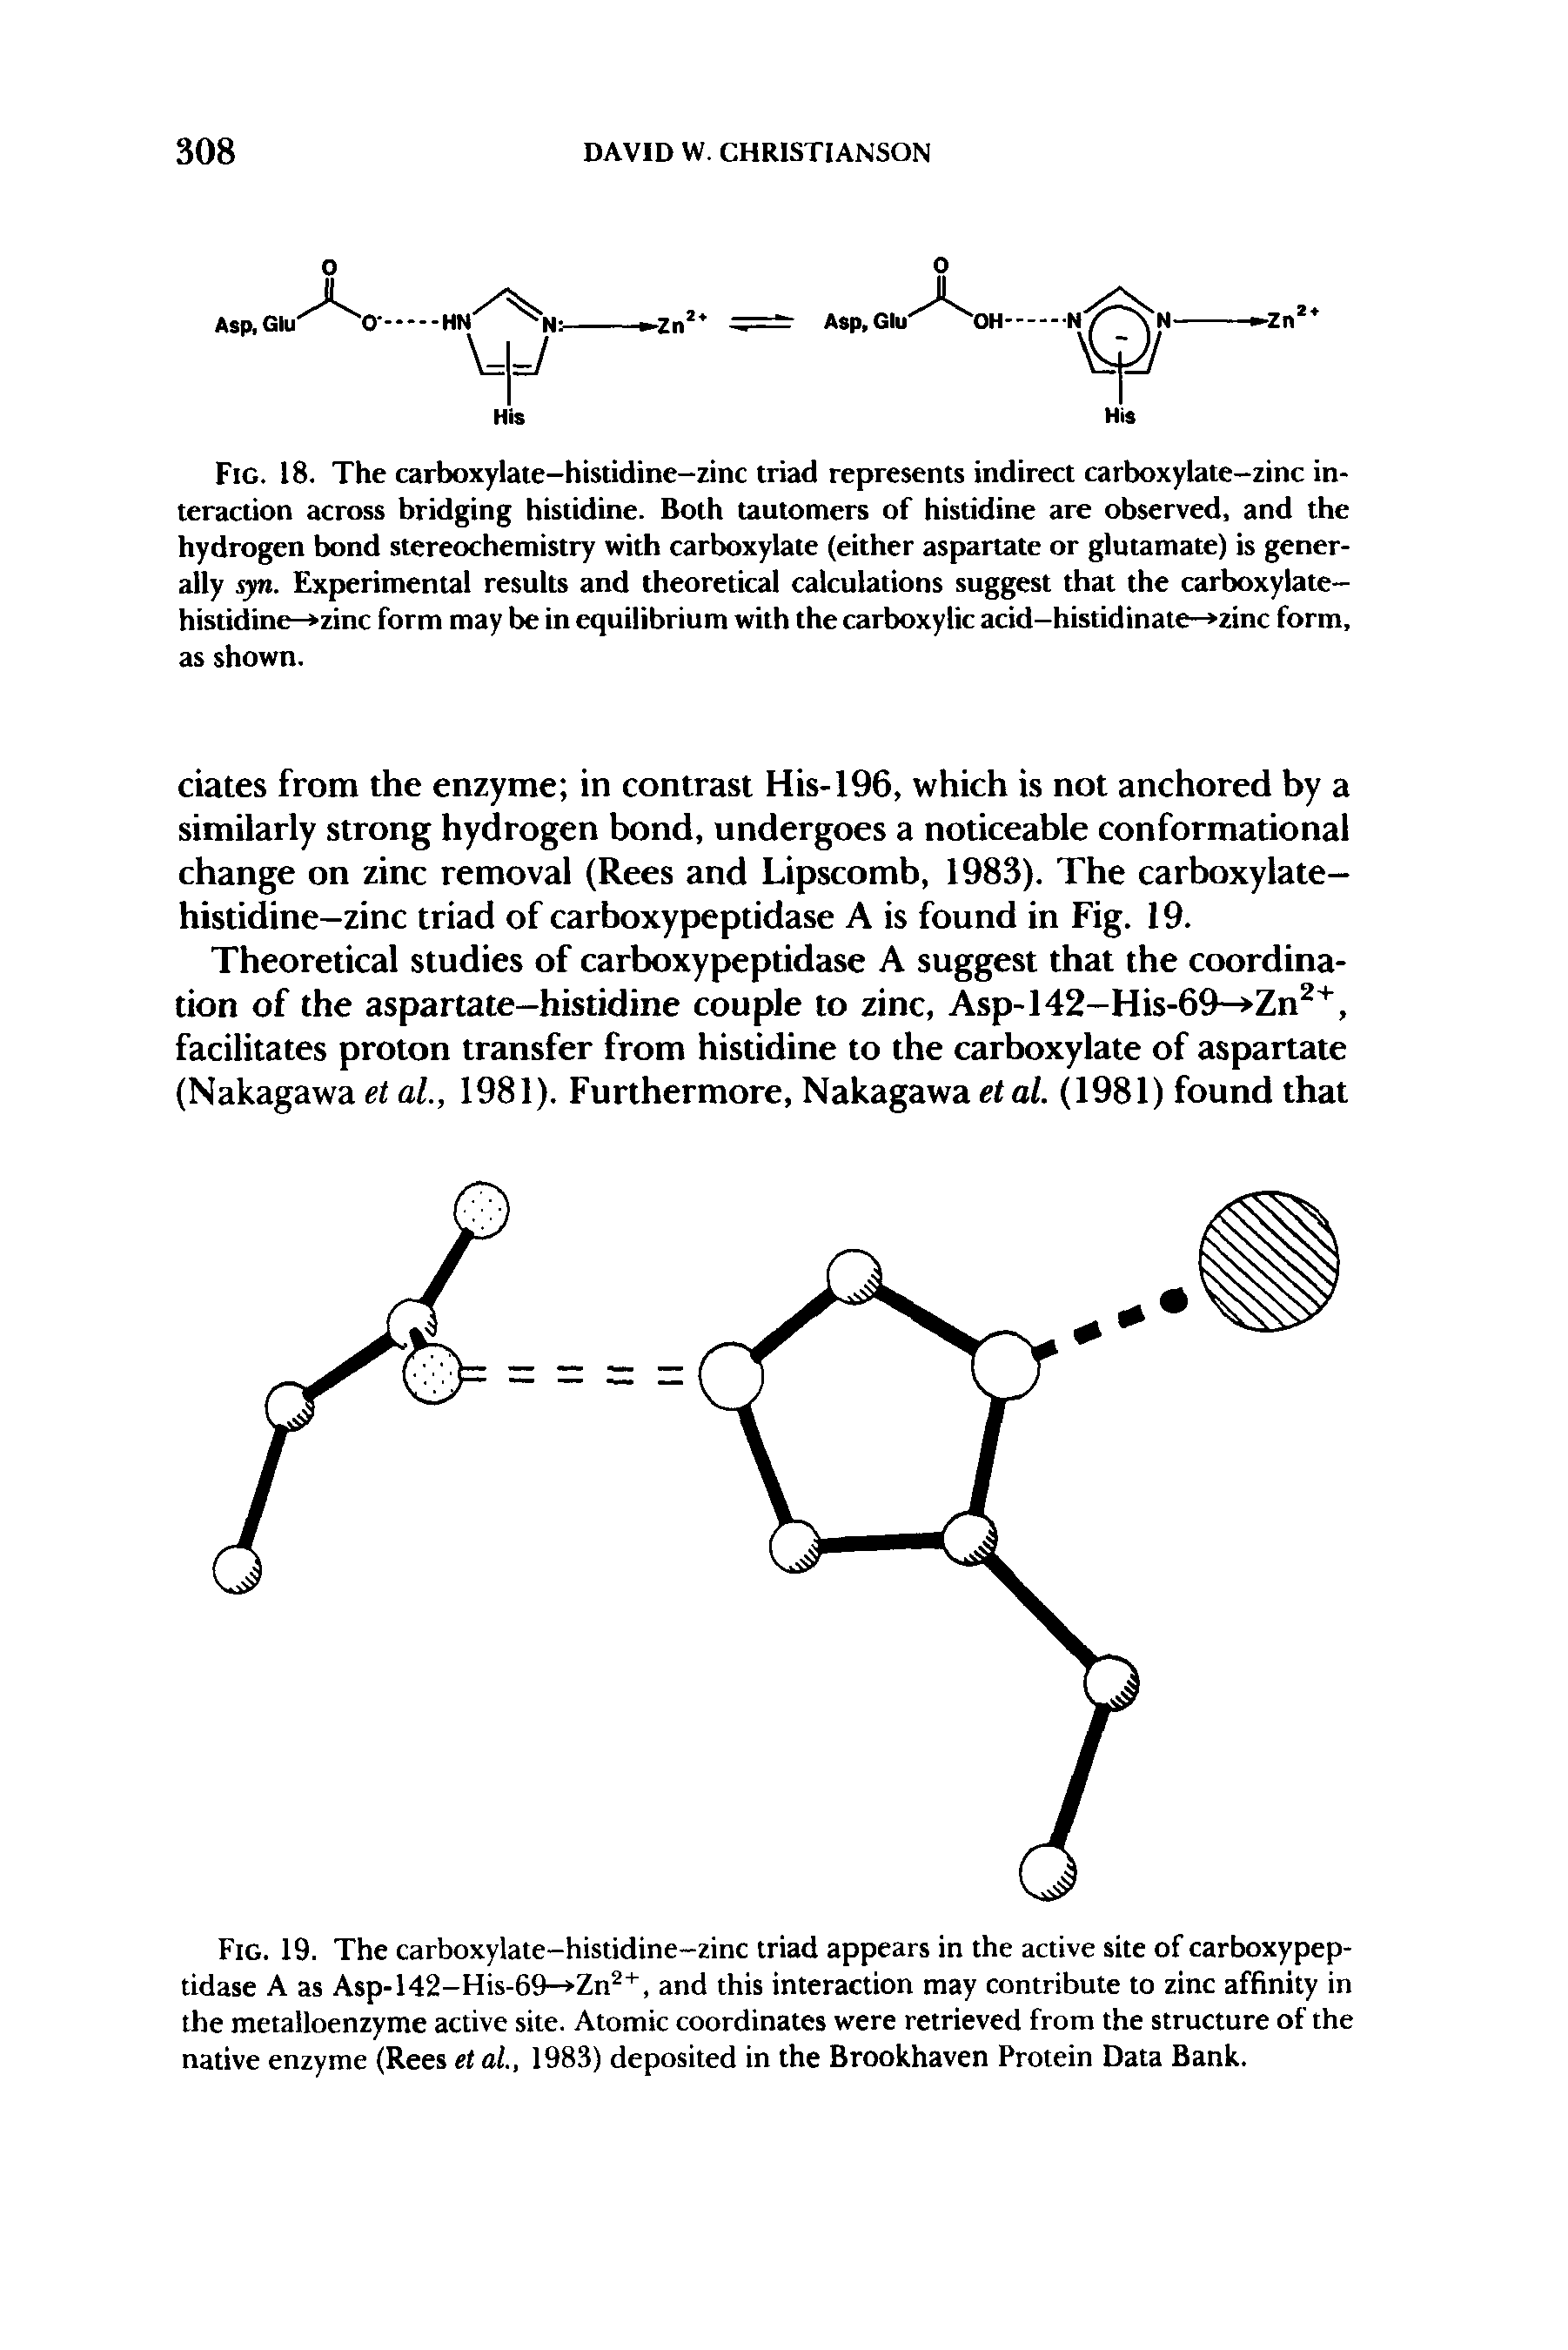 Fig. 19. The carboxylate-histidine-zinc triad appears in the active site of carboxypeptidase A as Asp-142-His-69—and this interaction may contribute to zinc affinity in the metalloenzyme active site. Atomic coordinates were retrieved from the structure of the native enzyme (Rees et al, 1983) deposited in the Brookhaven Protein Data Bank.